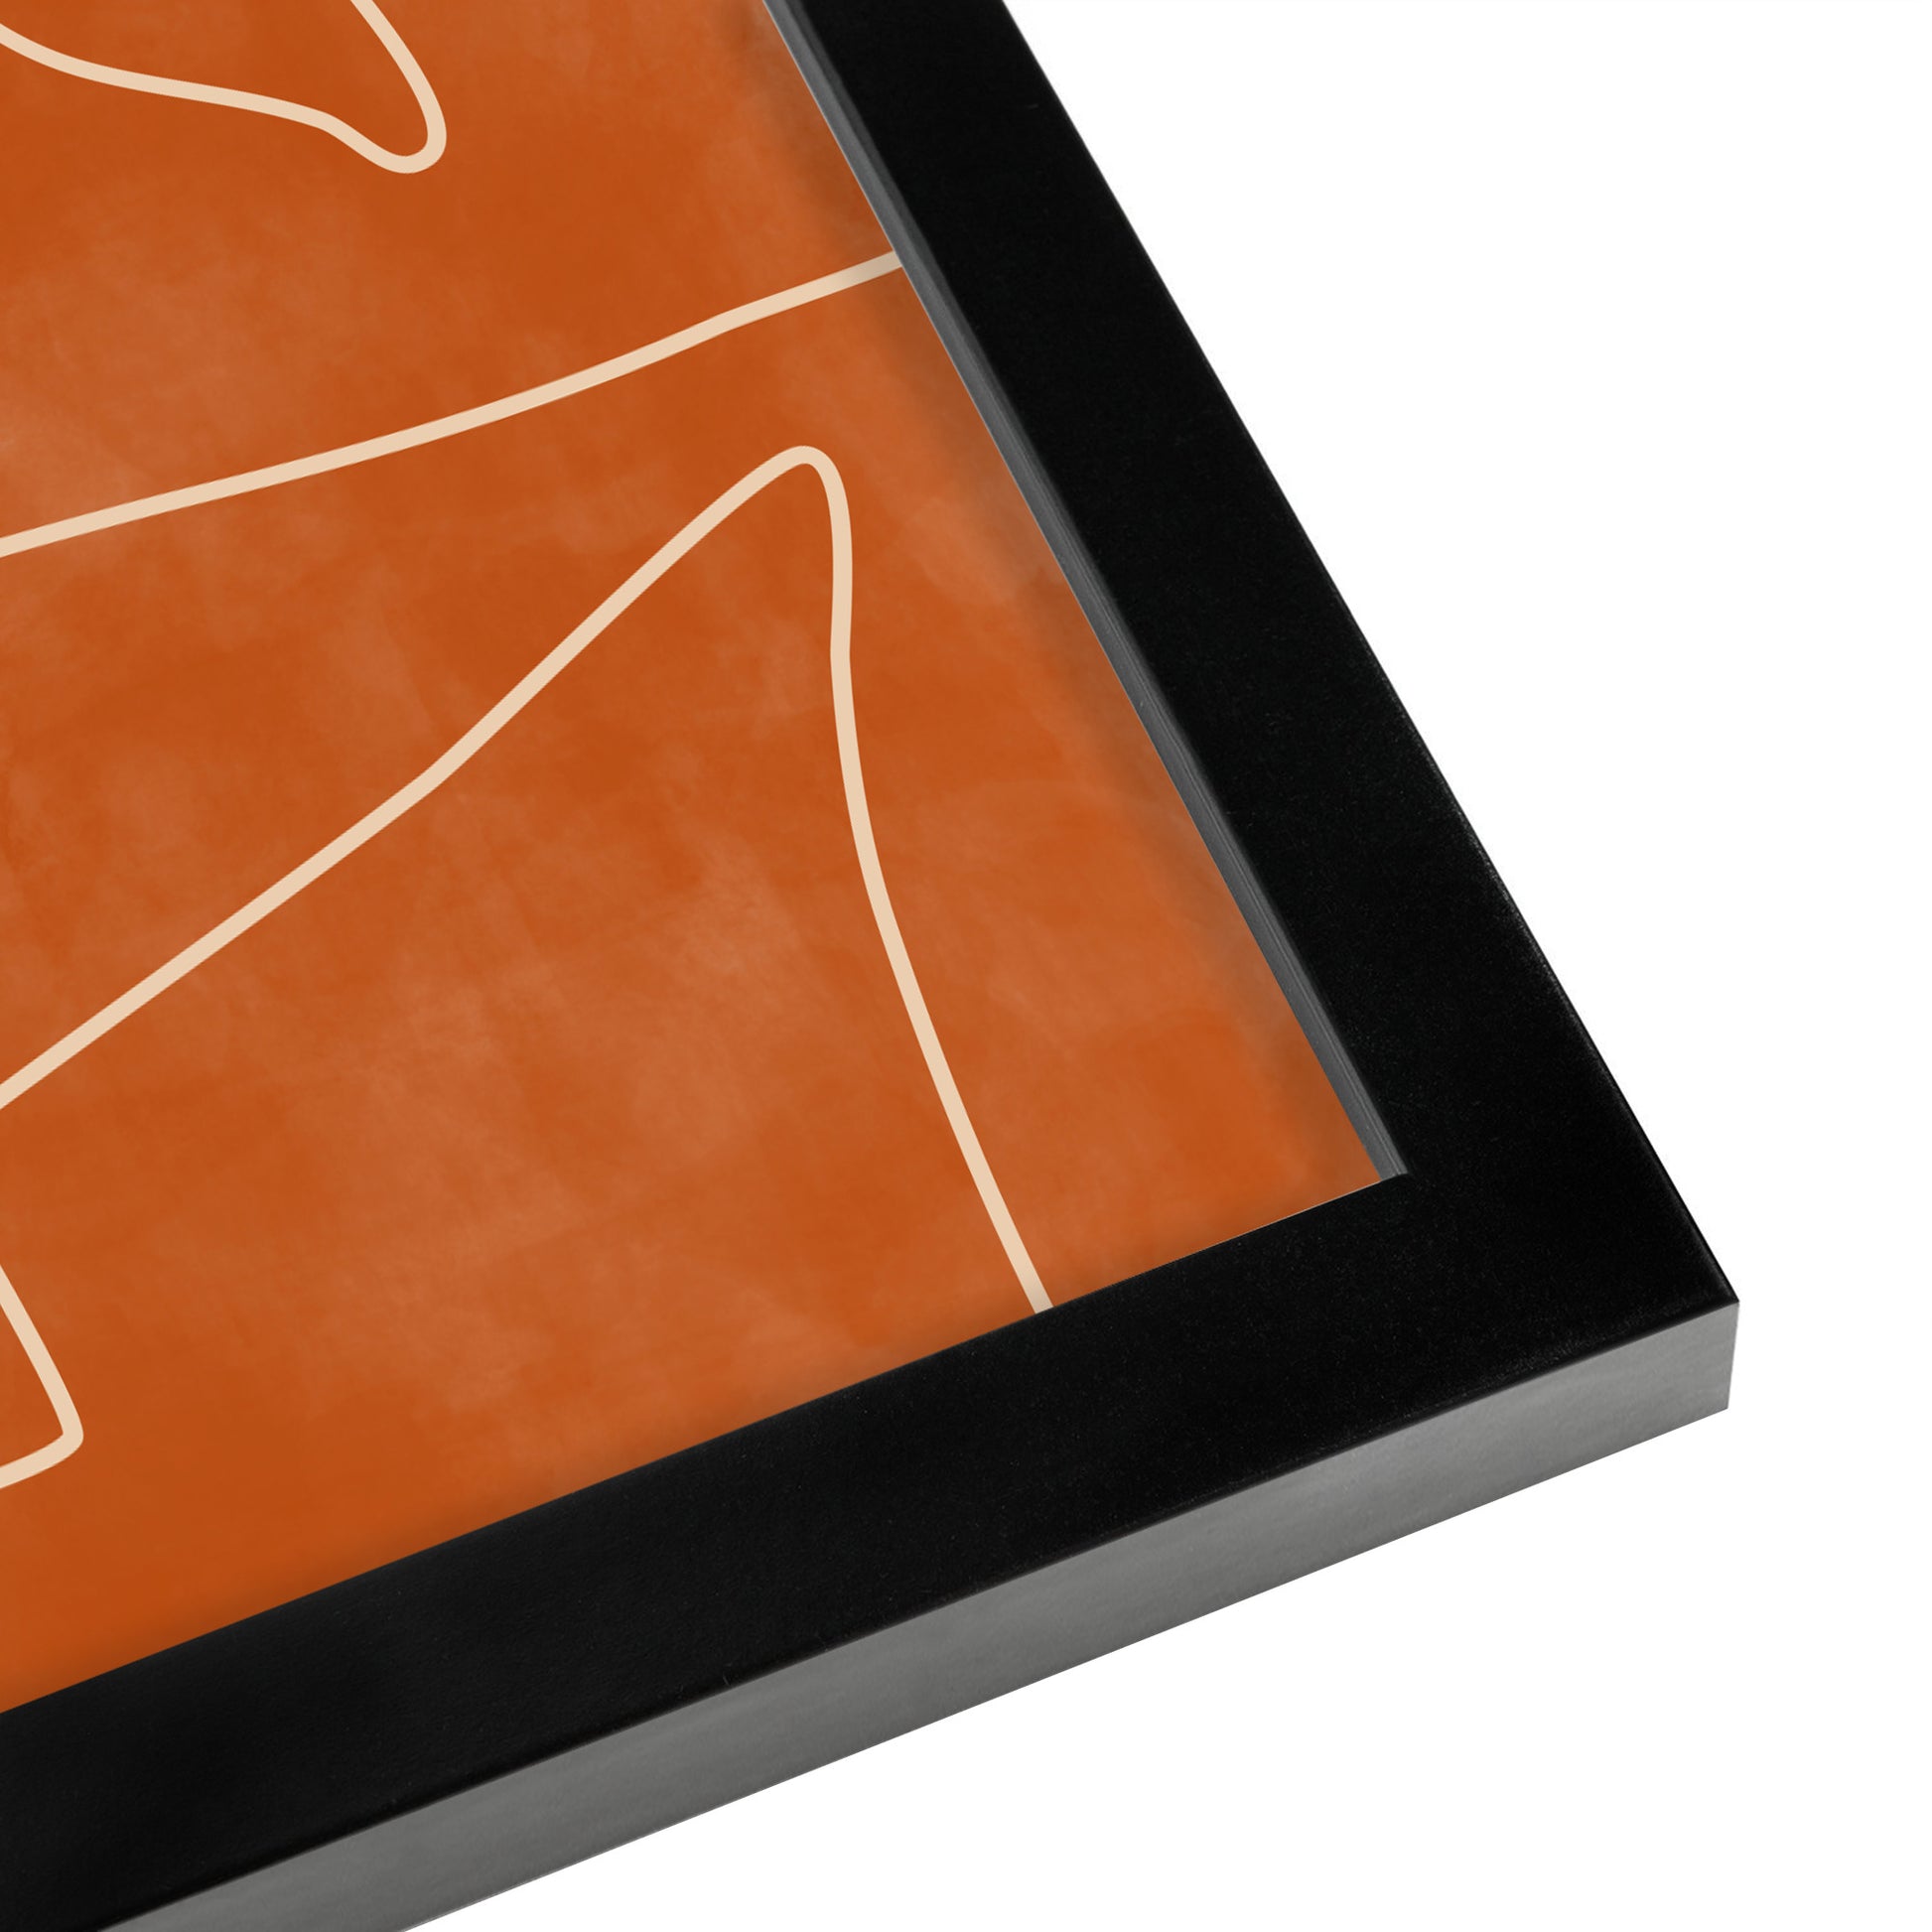 Terracotta Burnt Orange Abstract Shapes 2 by The Print Republic - Canvas, Poster or Framed Print